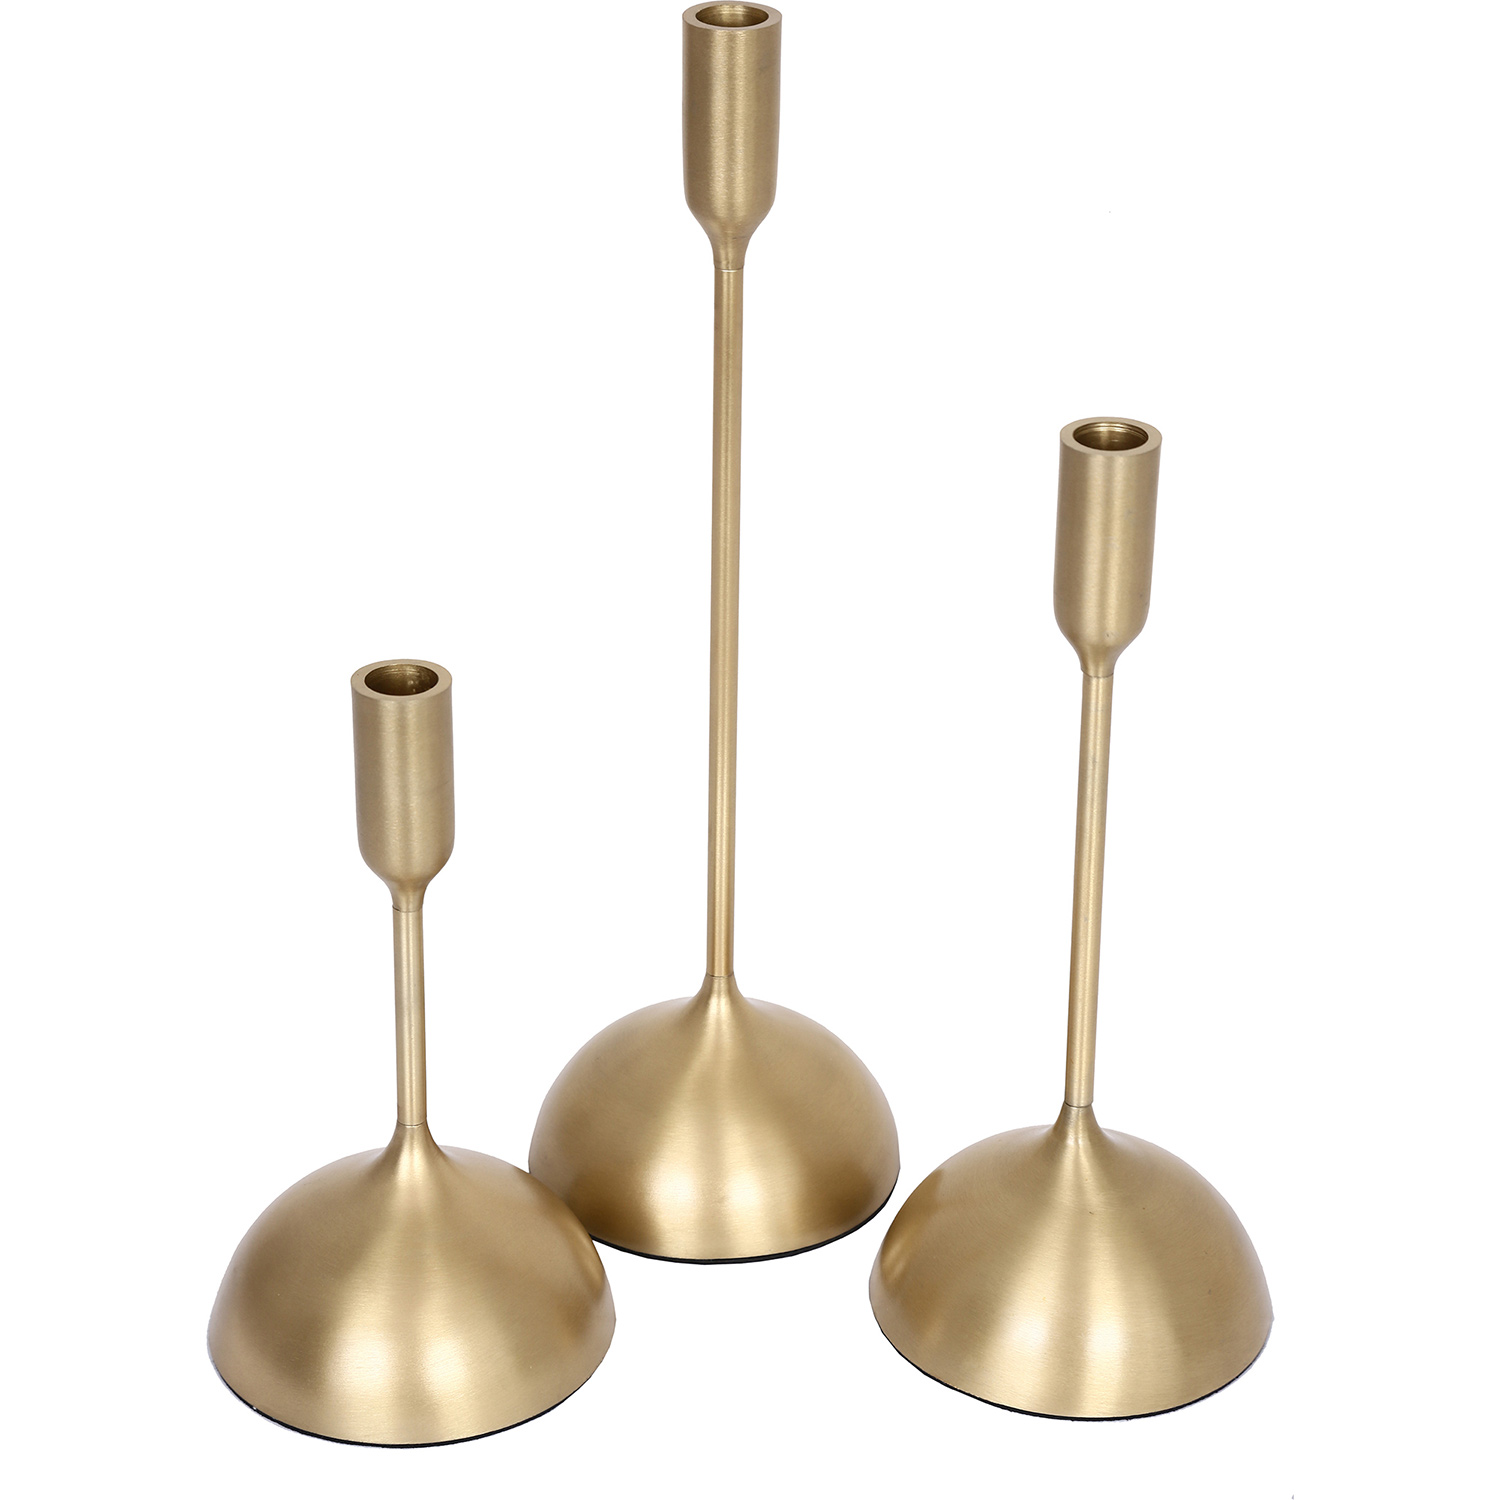 Ren-Wil Ferris Candle Holder - Gold